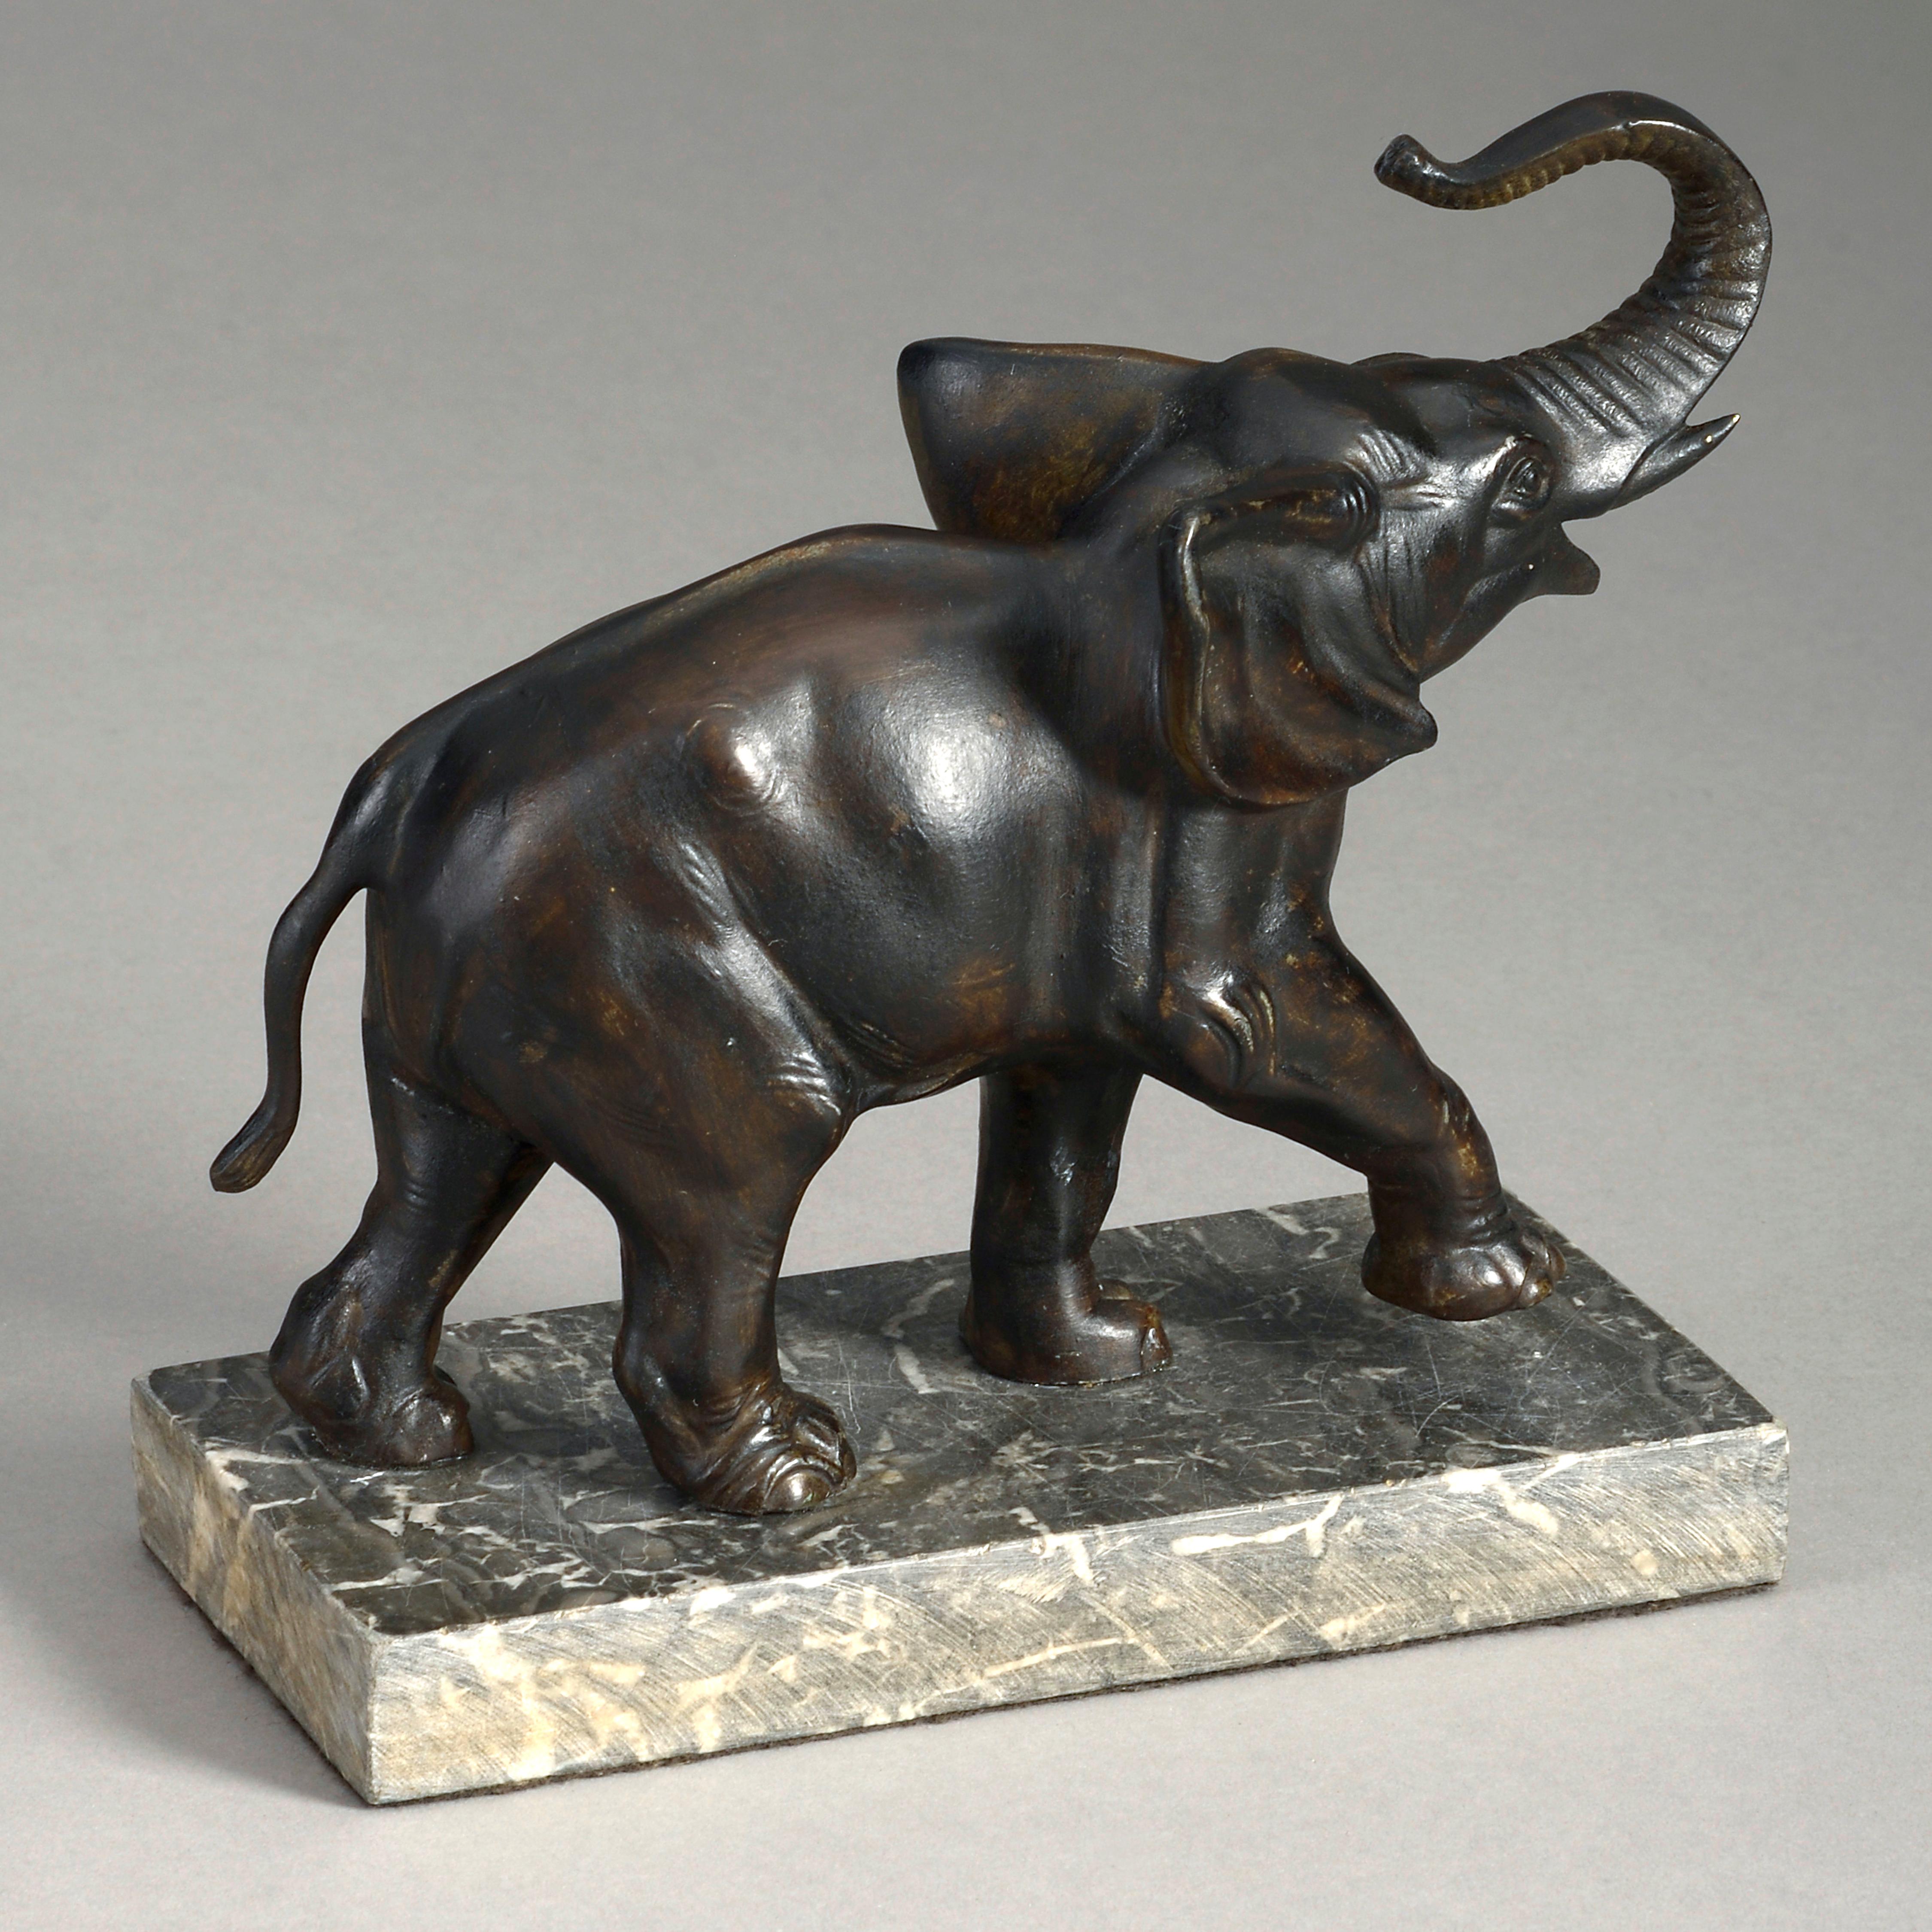 An early twentieth century bronzed sculpture depicting an elephant, naturalistically cast and set upon a marble base.